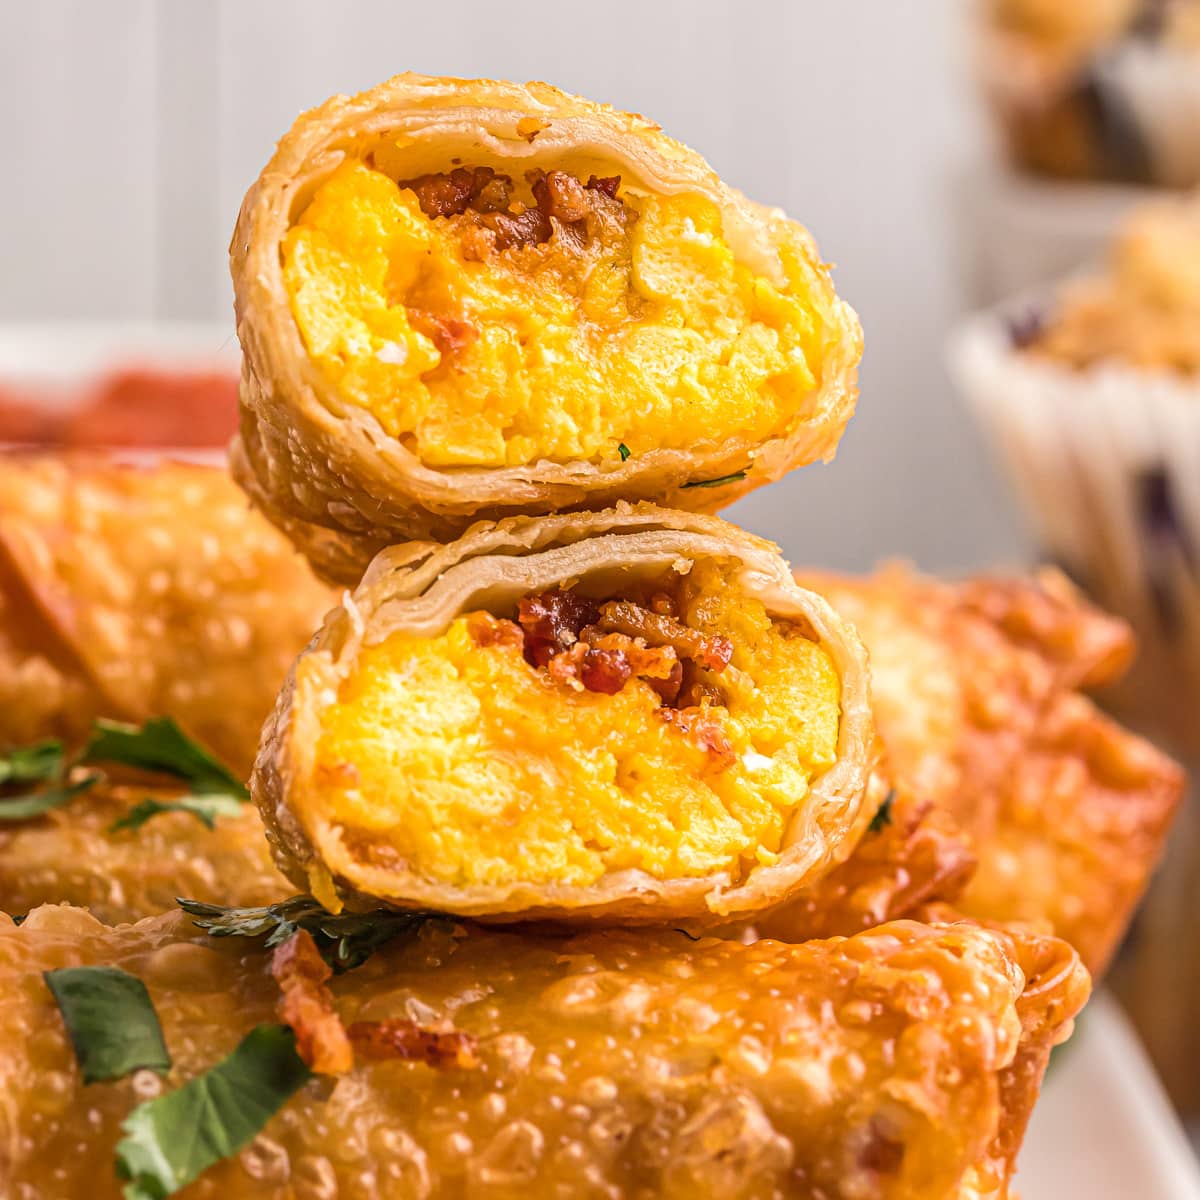 A crispy breakfast egg roll cut in half and stacked on other egg rolls.